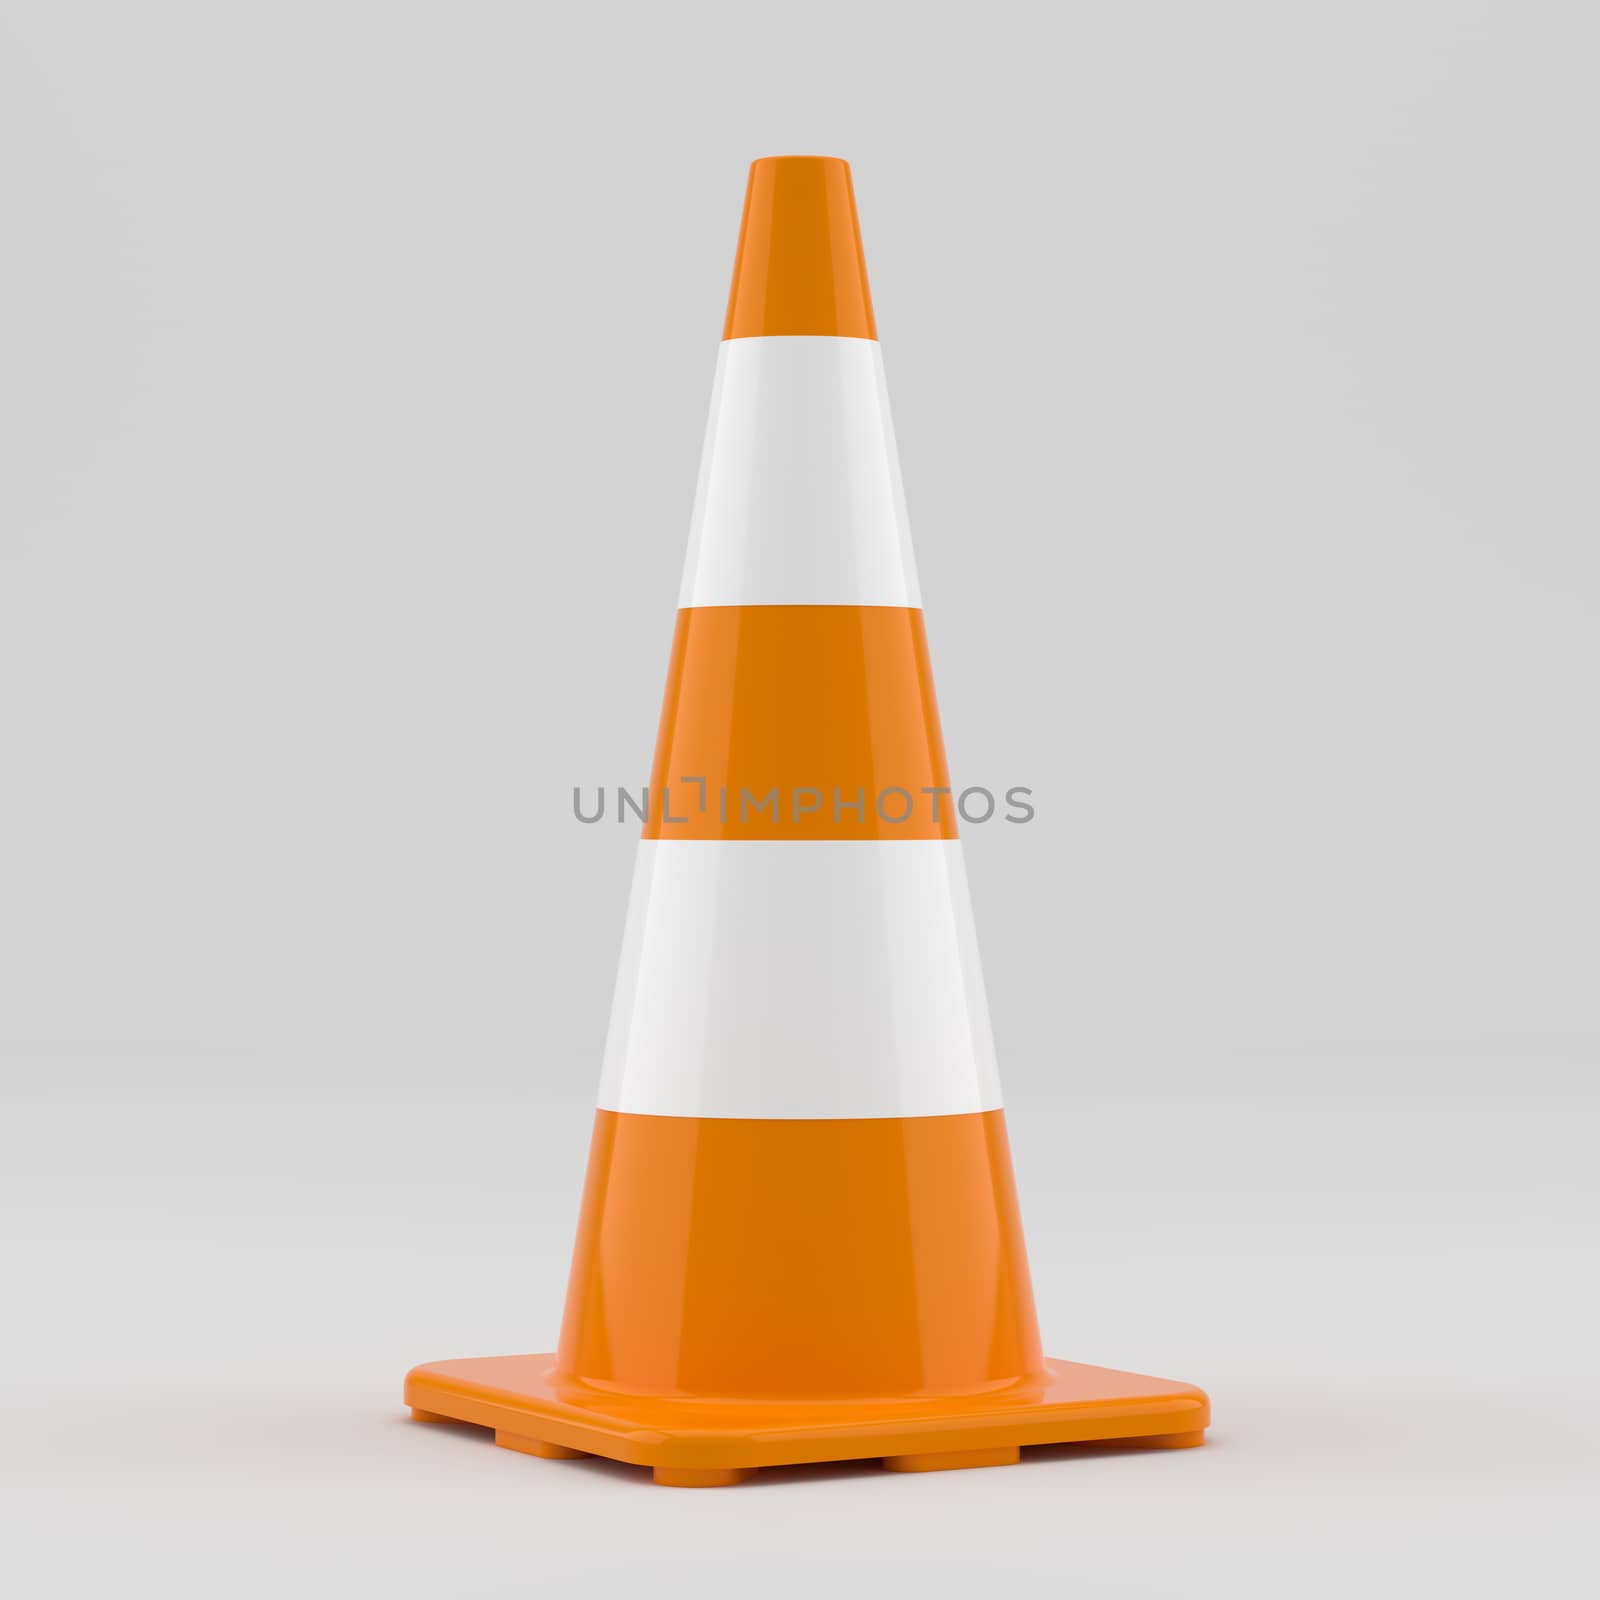 3D illustration of traffic cone. On gray background